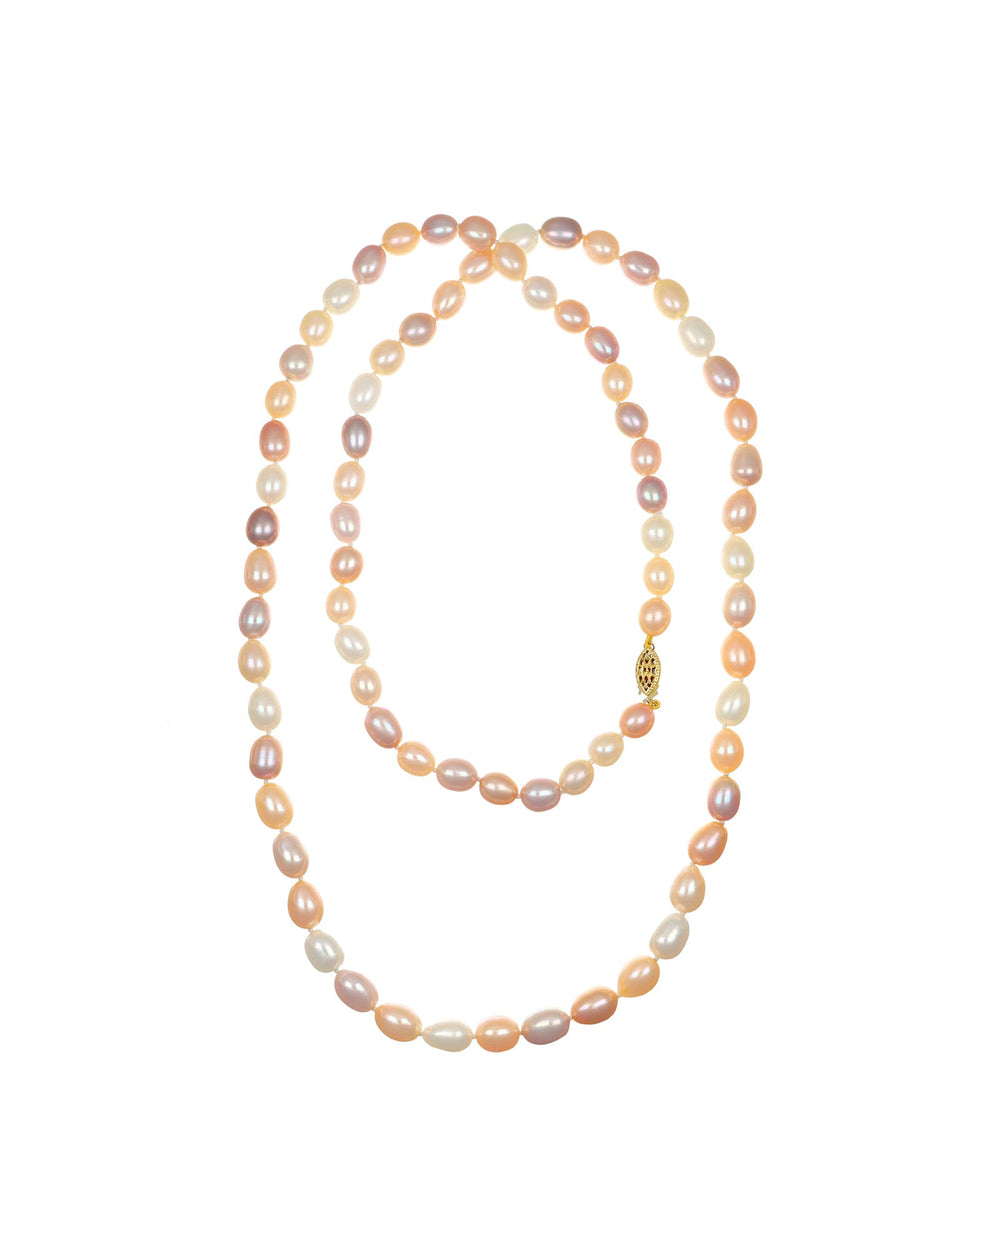 8-9mm Multicolor Oval Freshwater Pearl Necklace